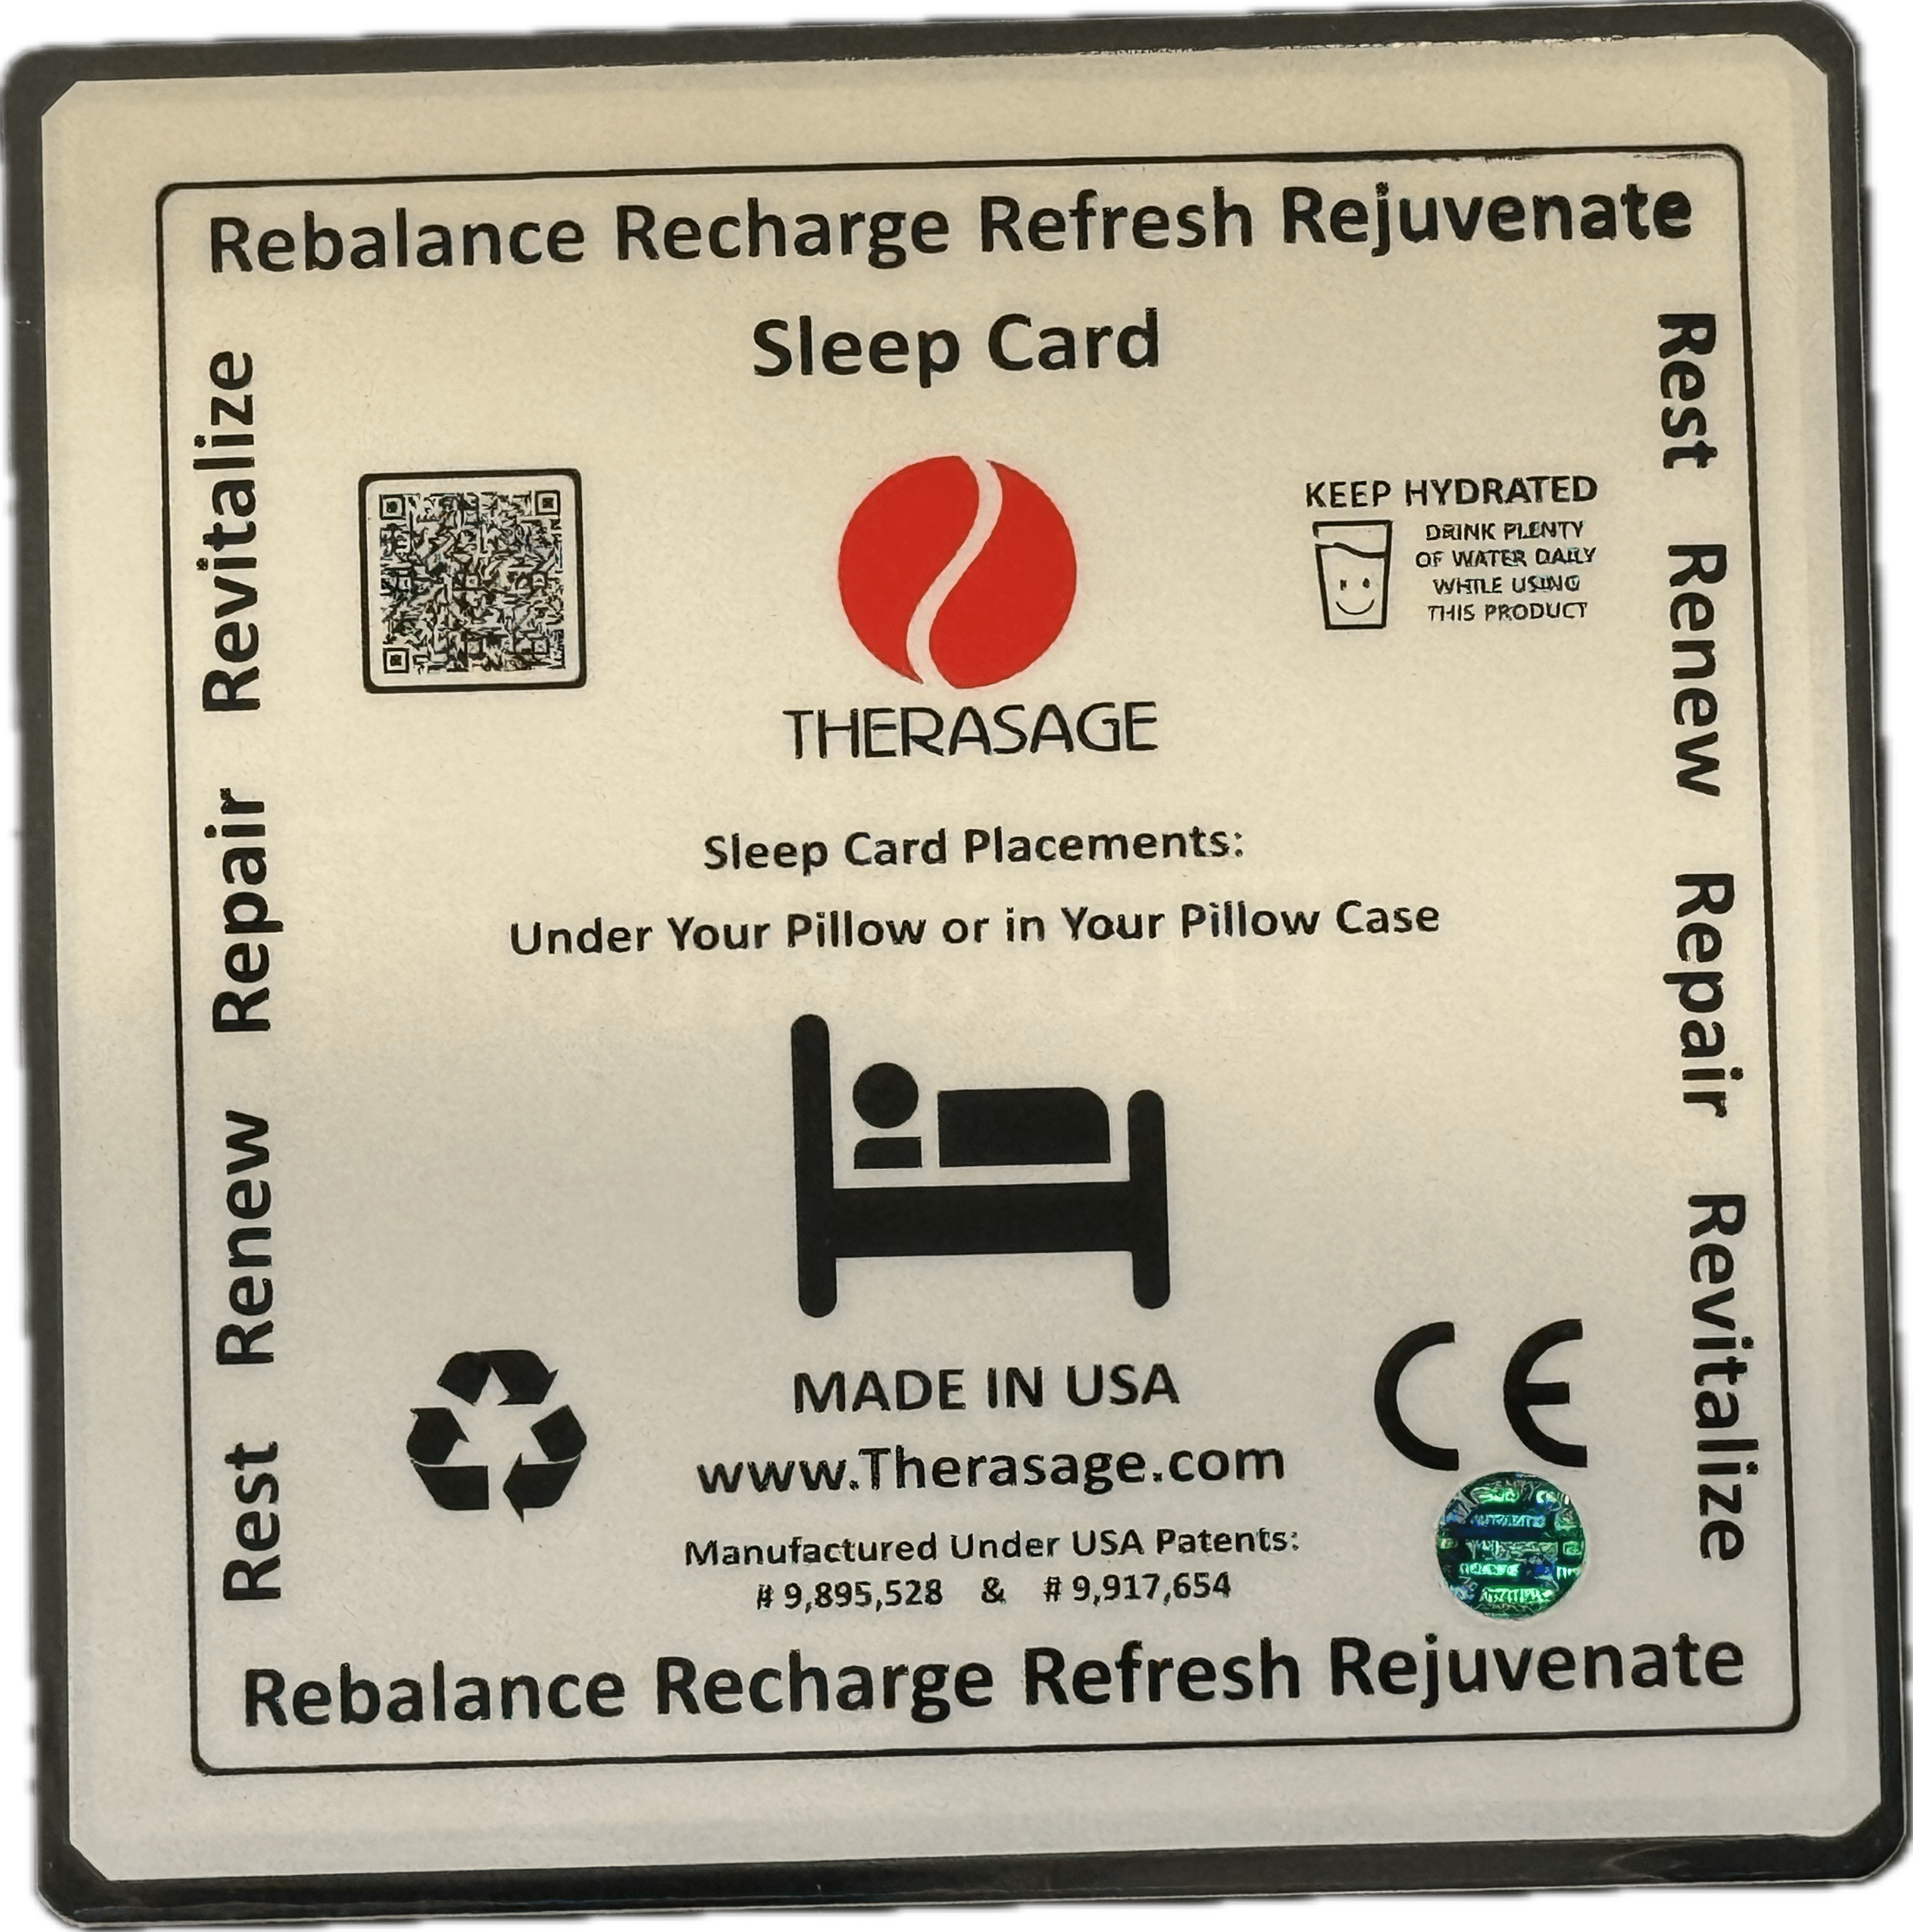 Therasage All Therasage TheraVibe - 6x6 Card - Sleep